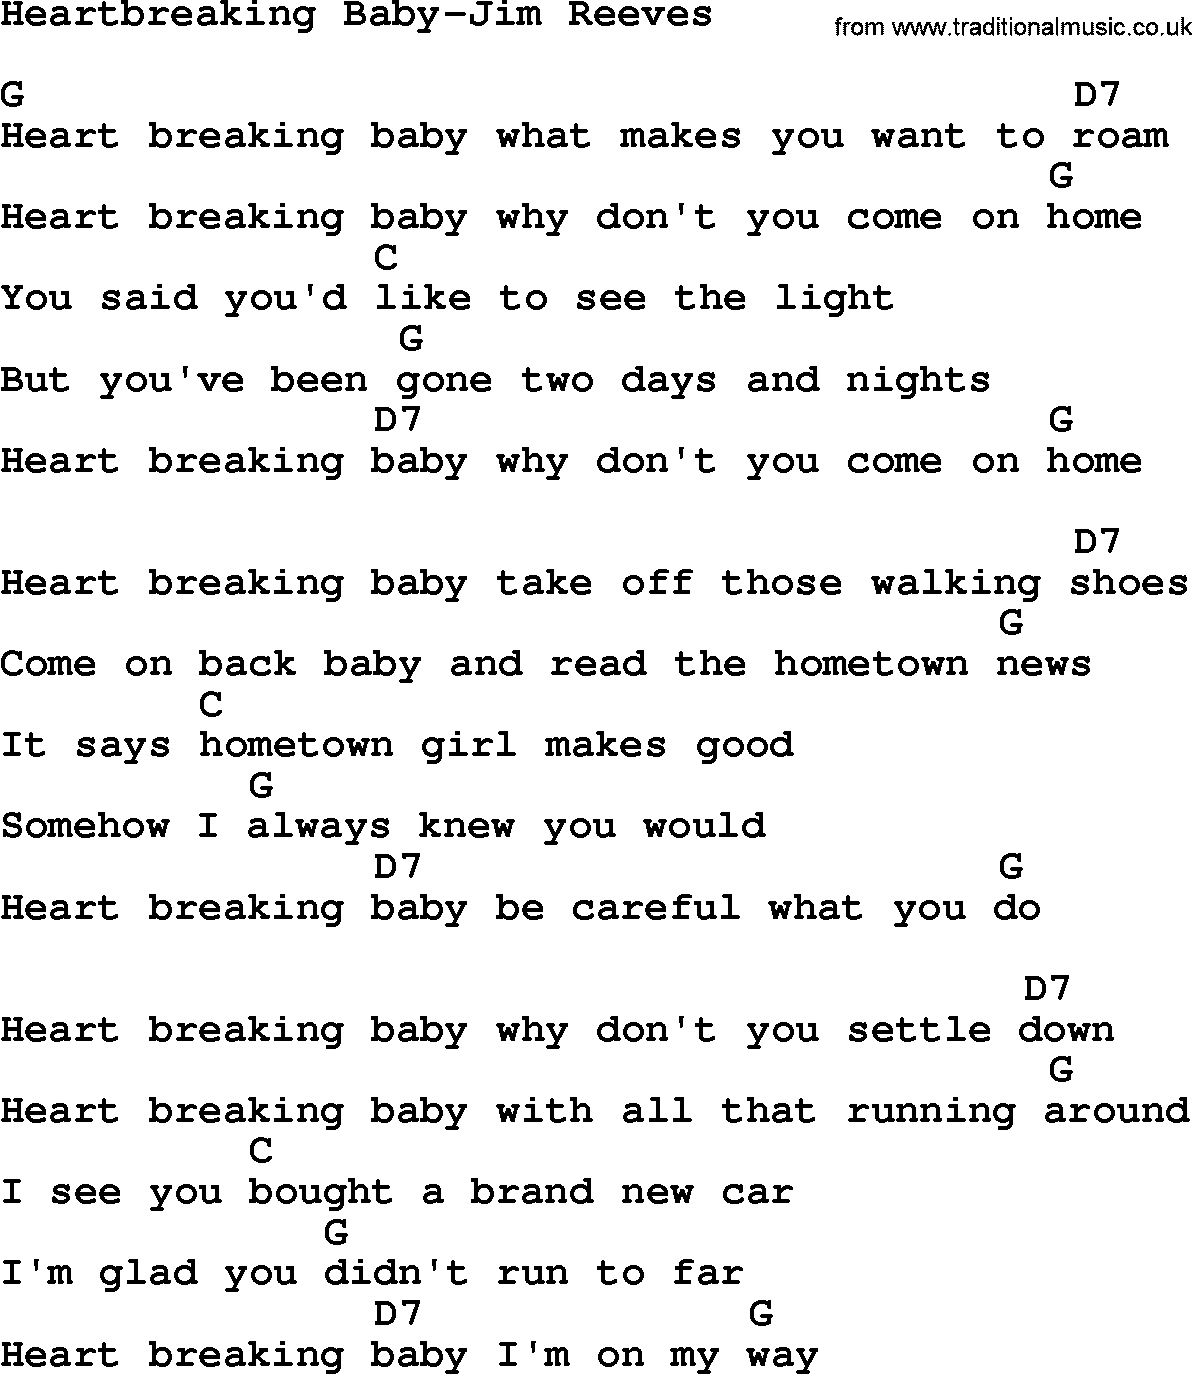 Country music song: Heartbreaking Baby-Jim Reeves lyrics and chords